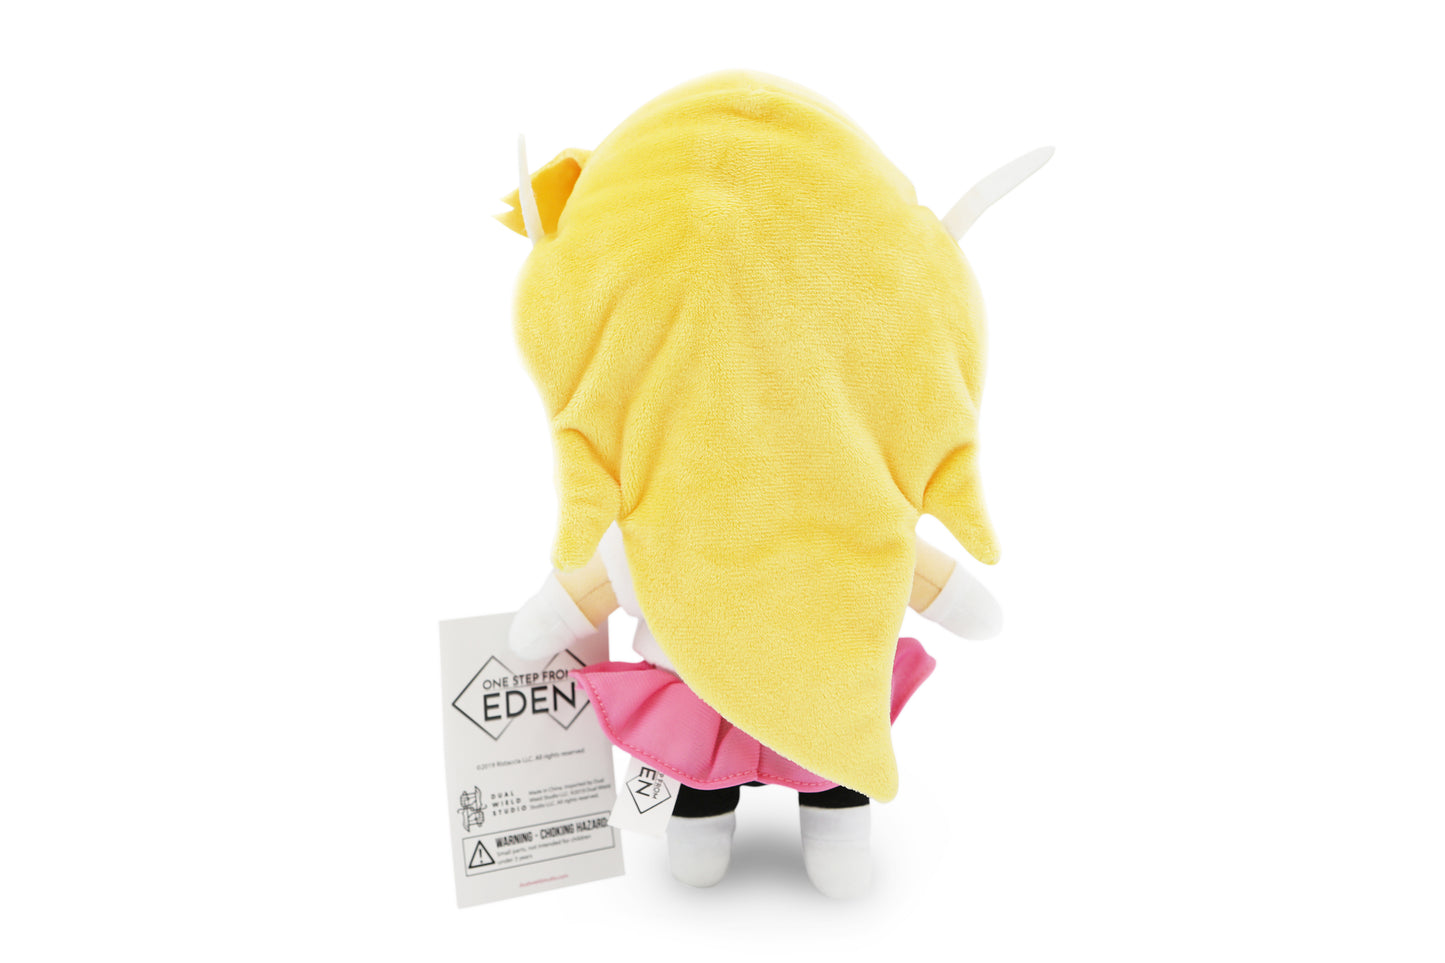 Back view of Saffron Plush with One step from Eden hangtag.